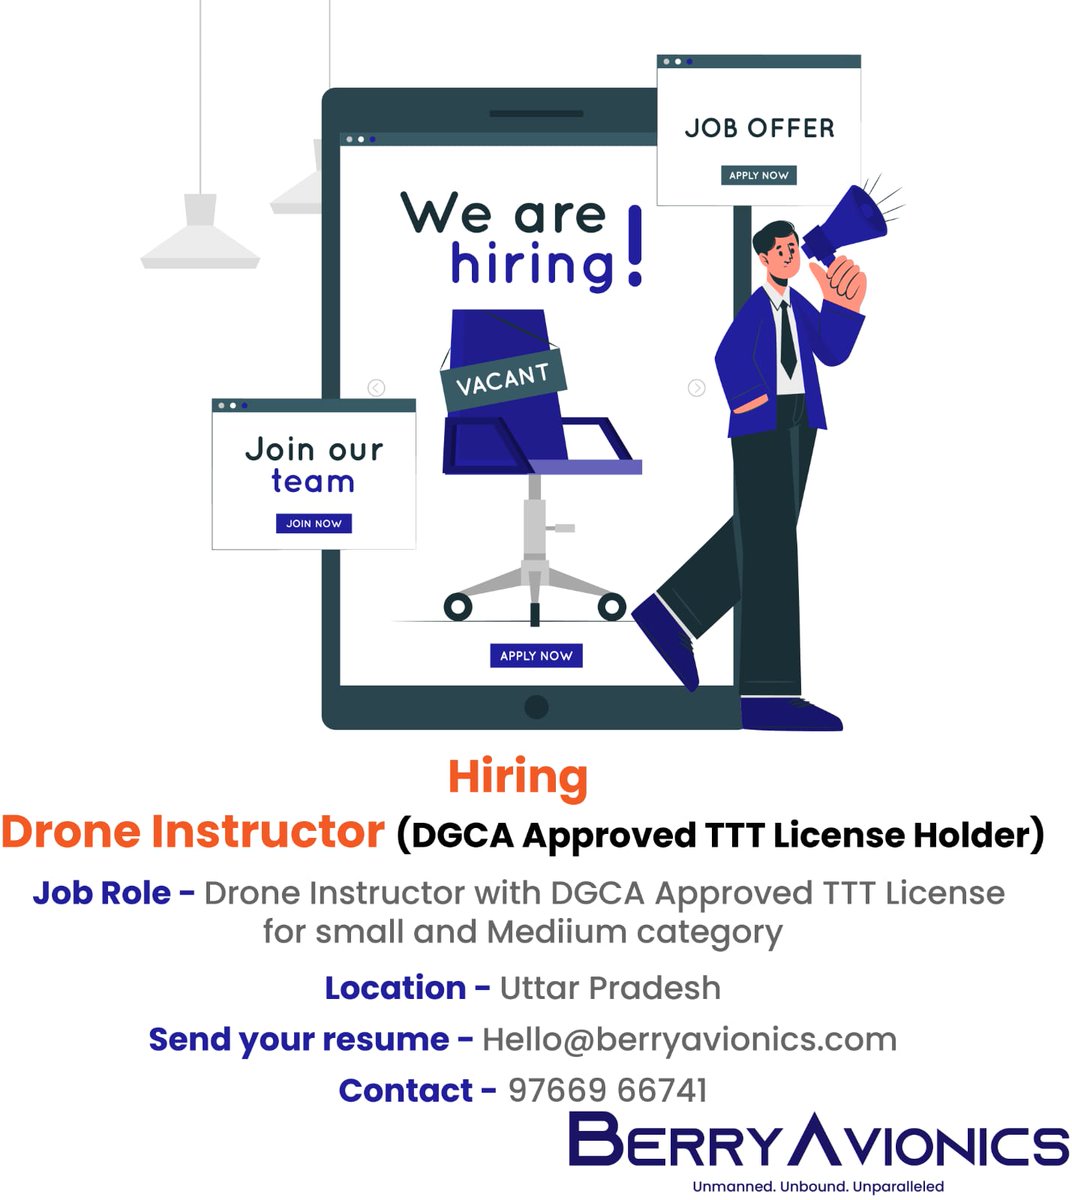 JOB ALERT _ 📢 📢 from Berry Avionics for RPAS Instructor 👈 👉 Salary INR 6-8LPA Apply to 👉hello@berryavionics.com Know more here : rb.gy/rjl5tf #dronepilots #droneoperator #droneflight #Jobs #jobsearch #JobHunting #jobseekers #JobOpportunity #jobopening #jobvacancy